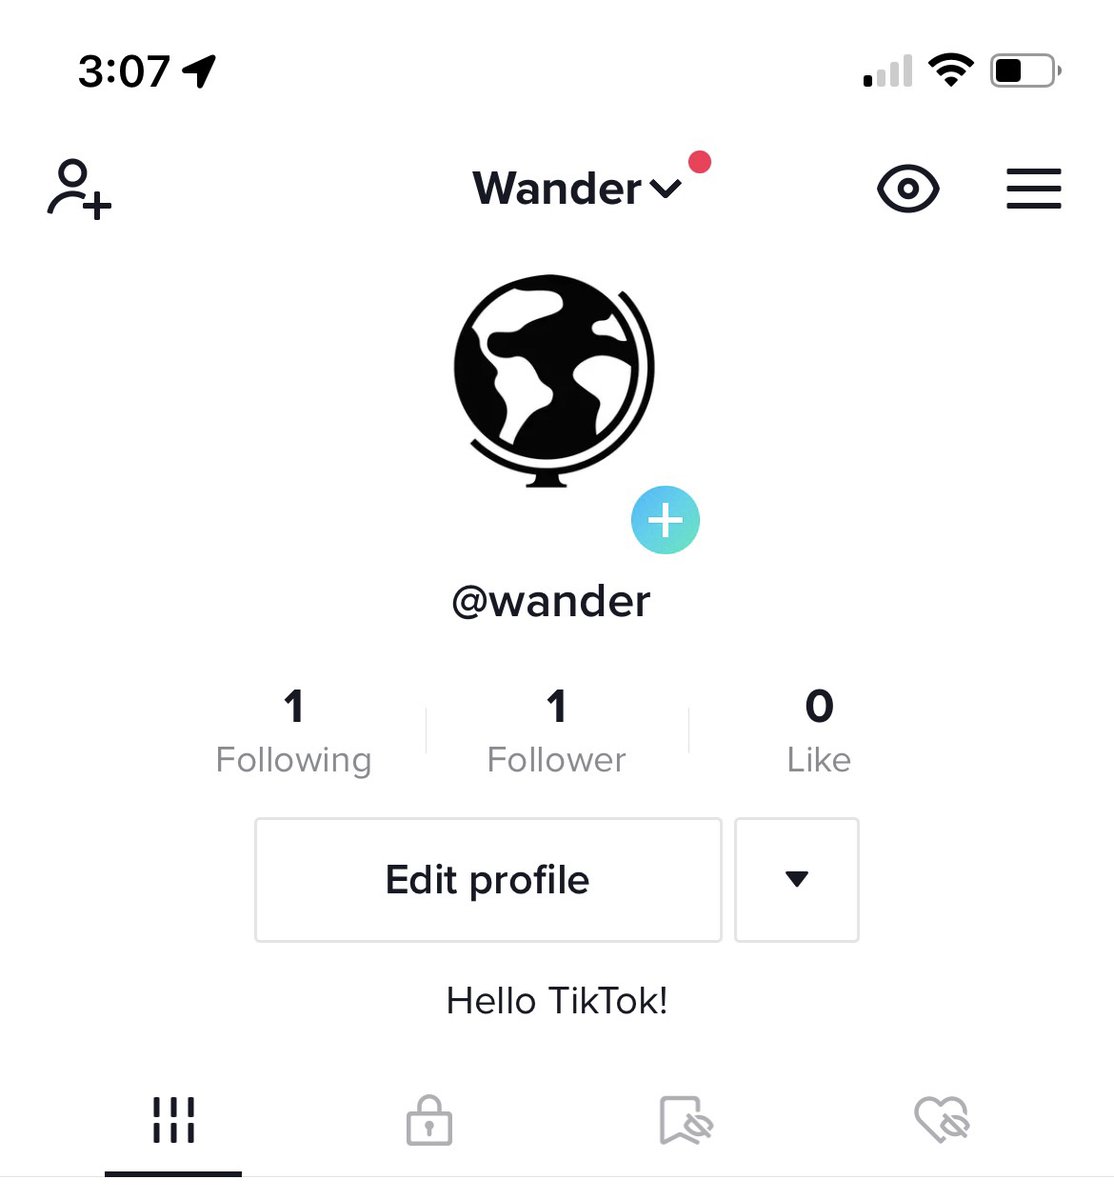 Call me a nerd but this makes me so happy. wander.com and @wander on all socials, including tiktok and no, I wont be posting dance vids